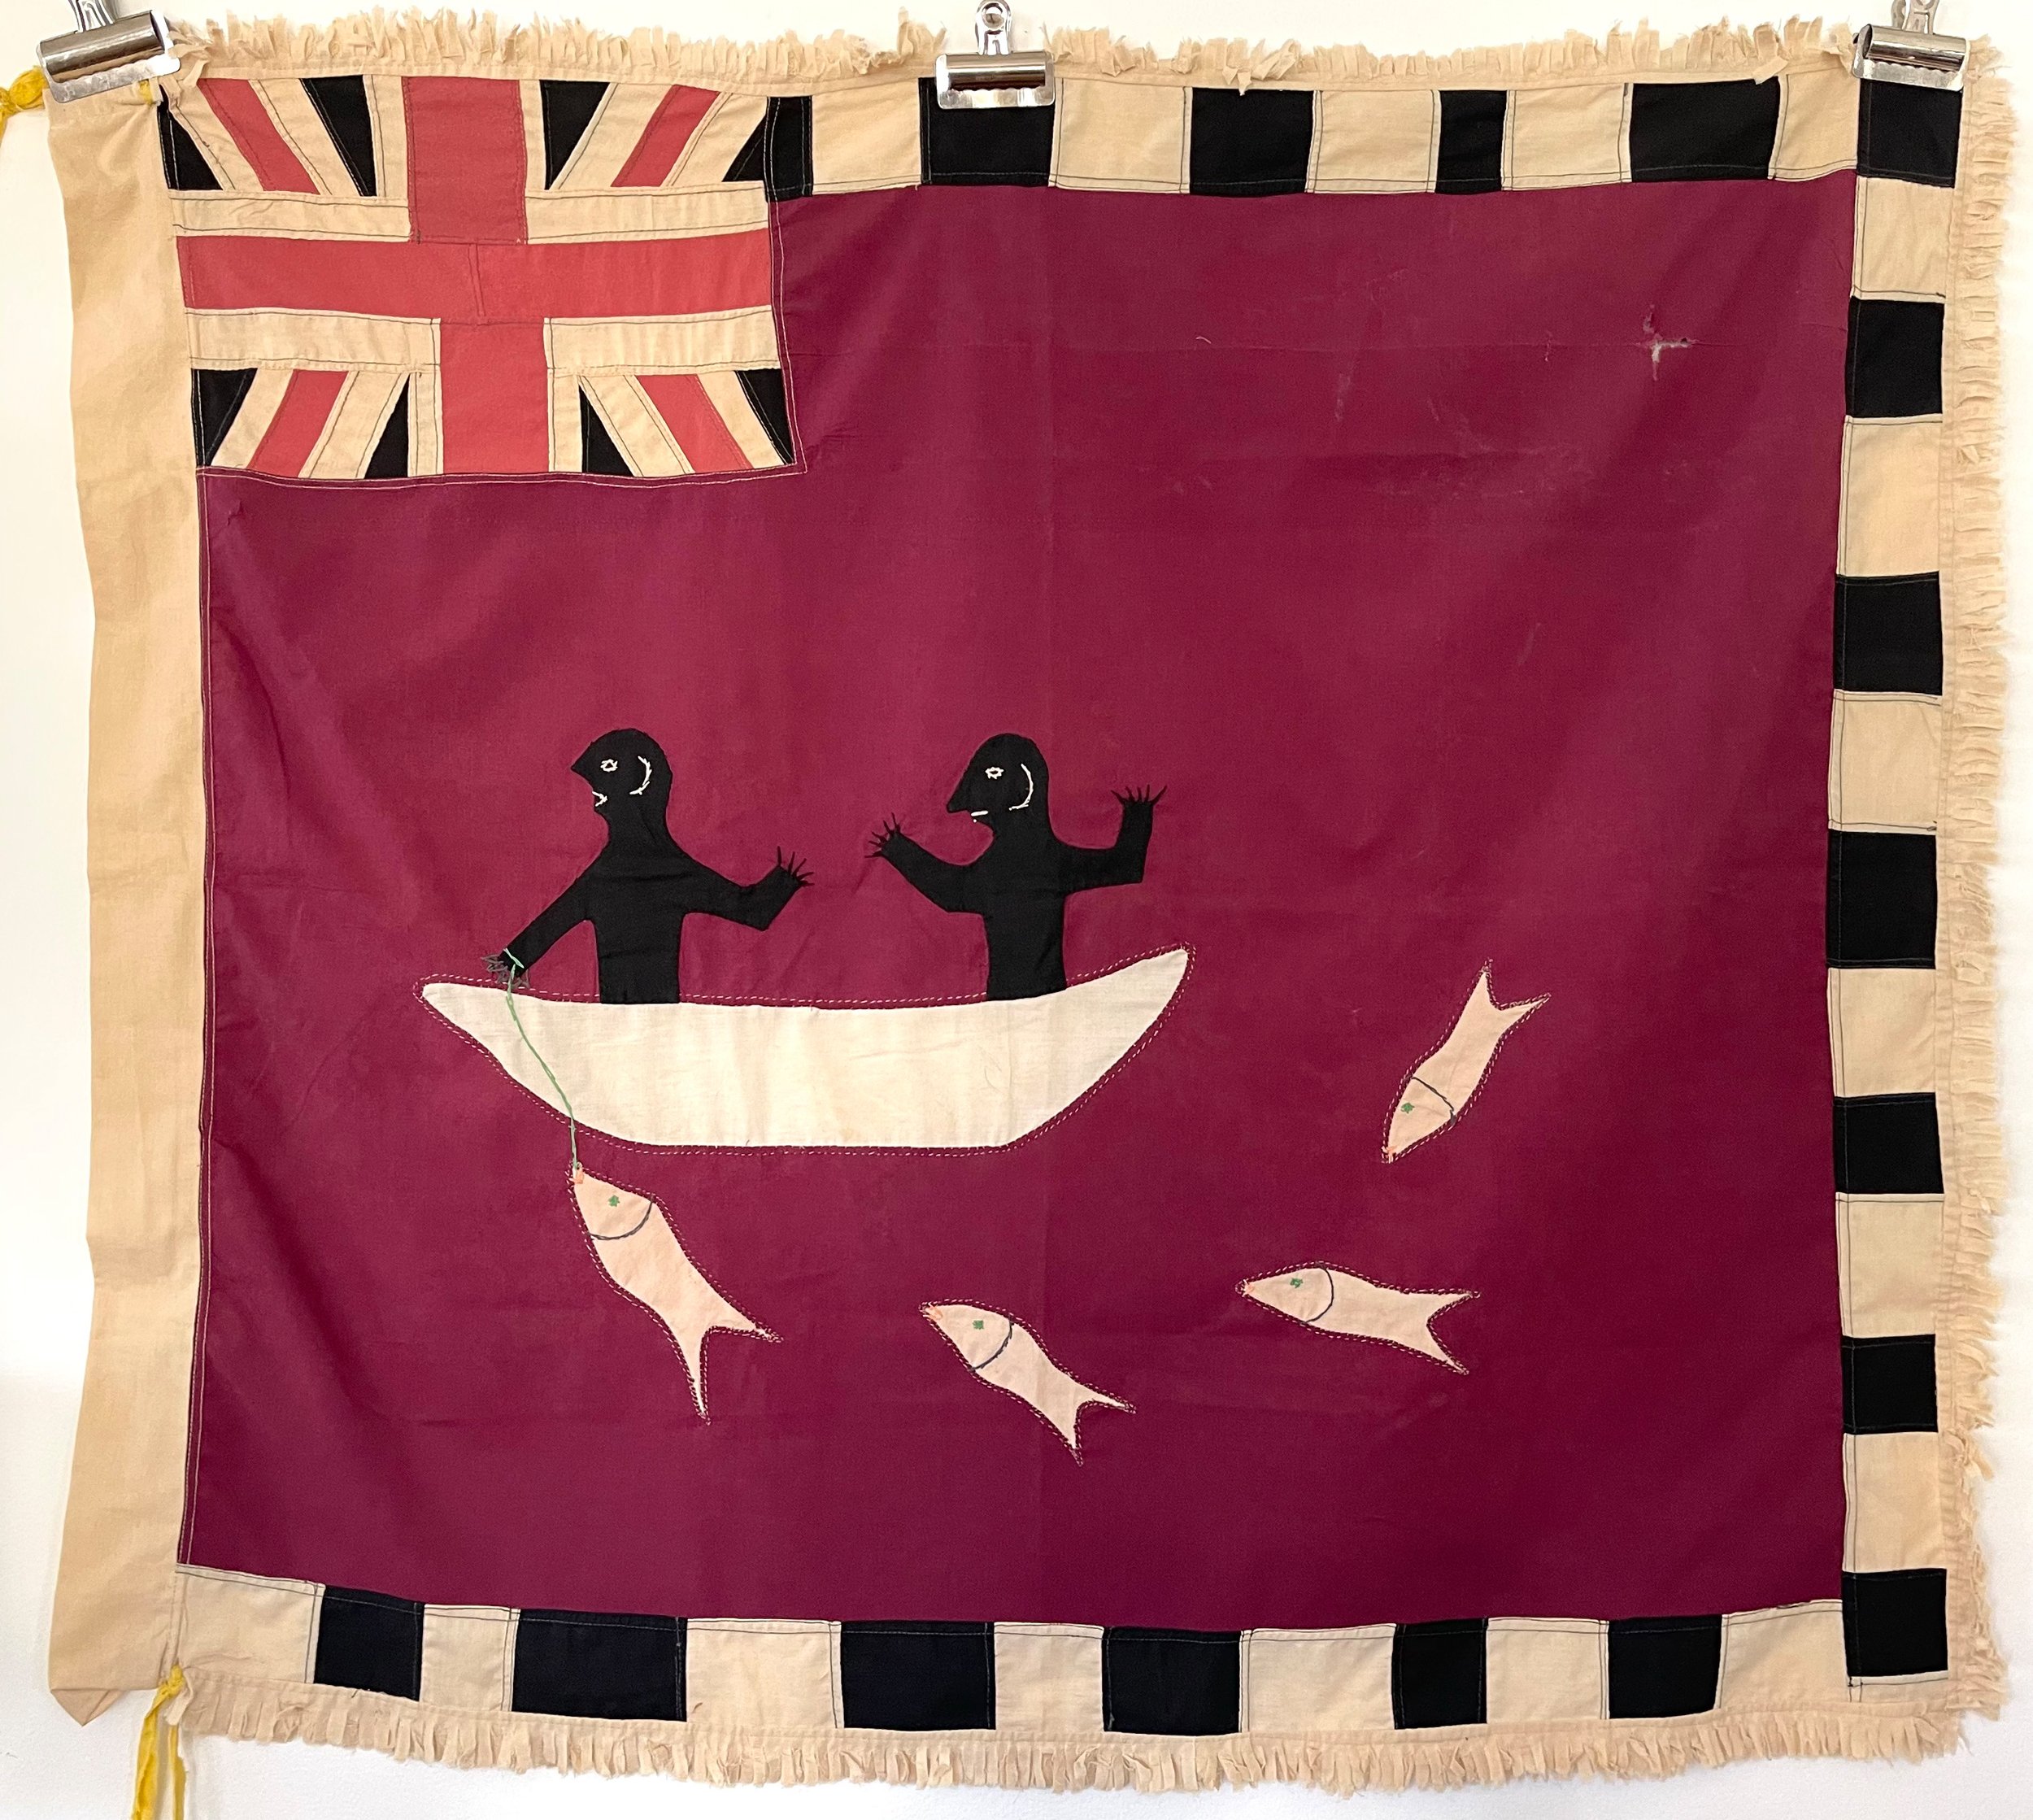   FLAG 005   Early-mid 20th century  40” x 44.5”    ASK ABOUT THIS WORK   